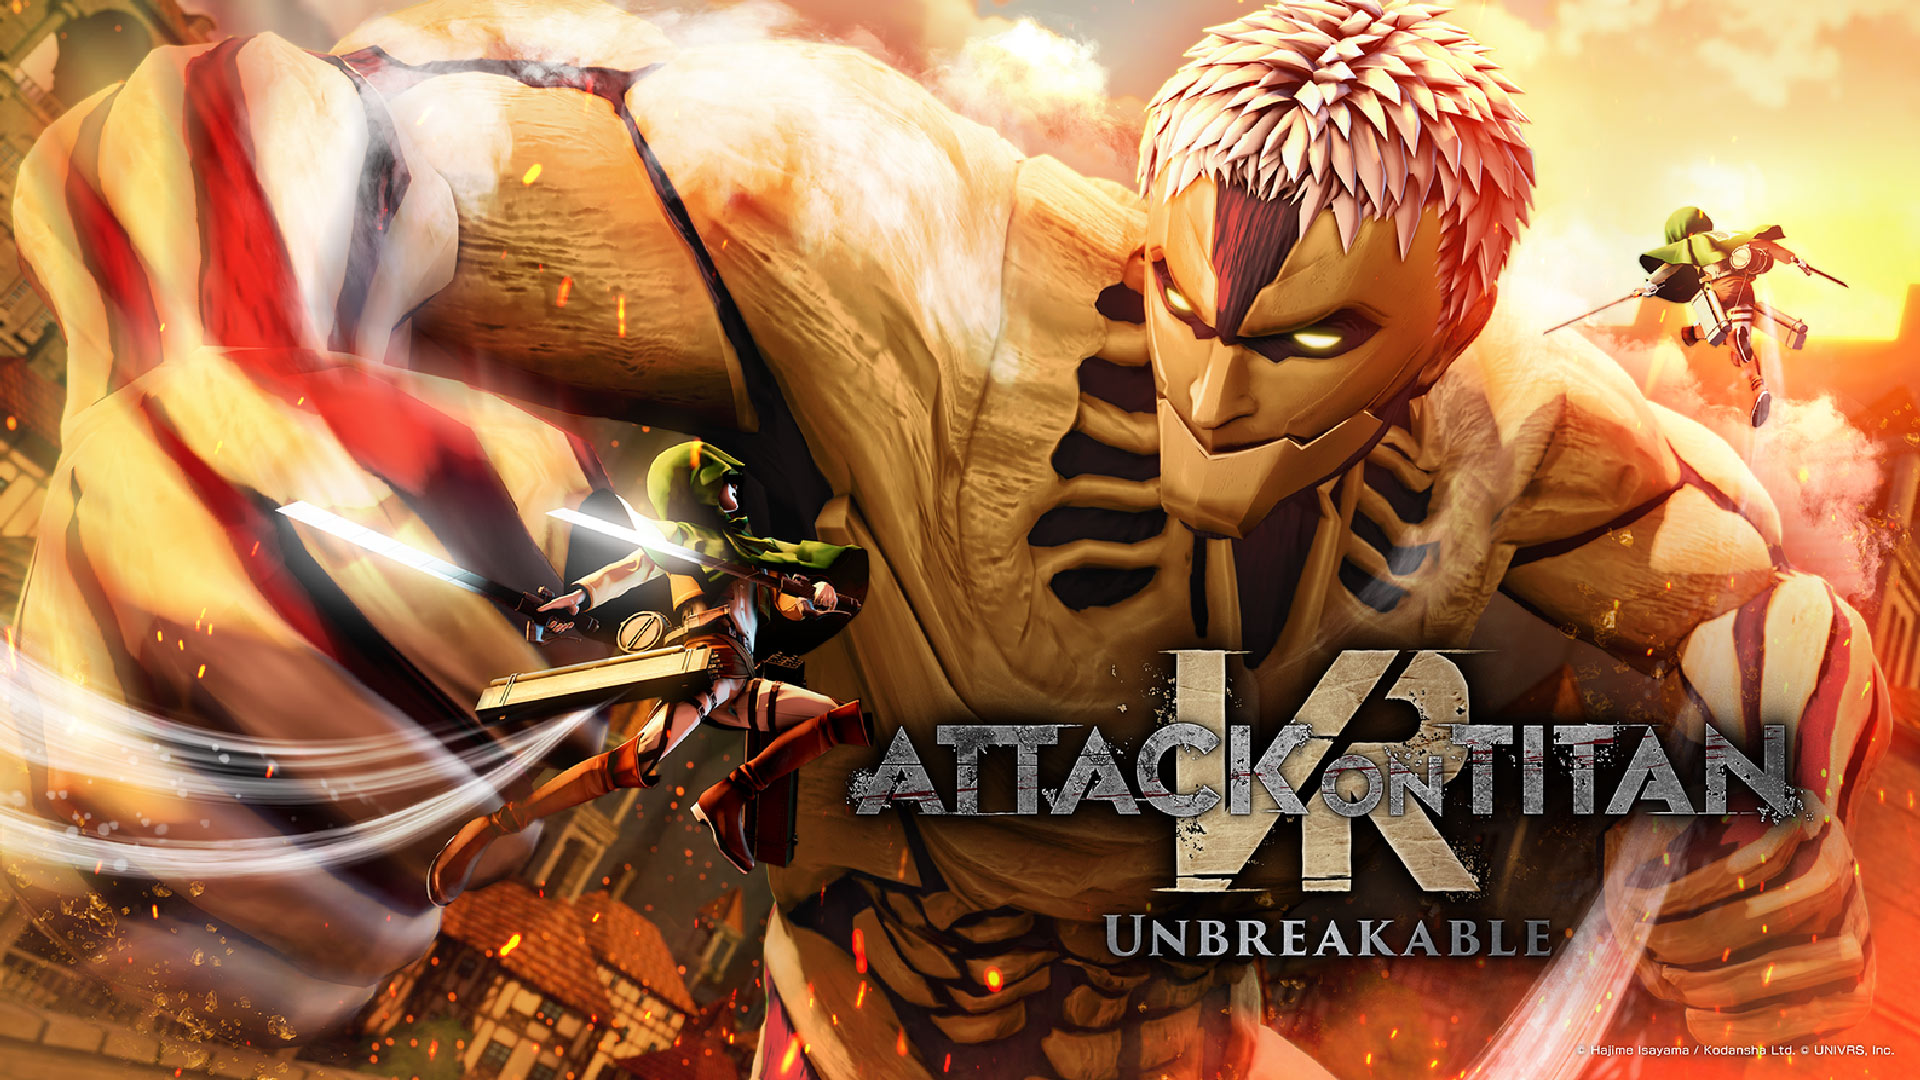 Attack On Titan Finale Release Date Announced (Updated) - GamerBraves